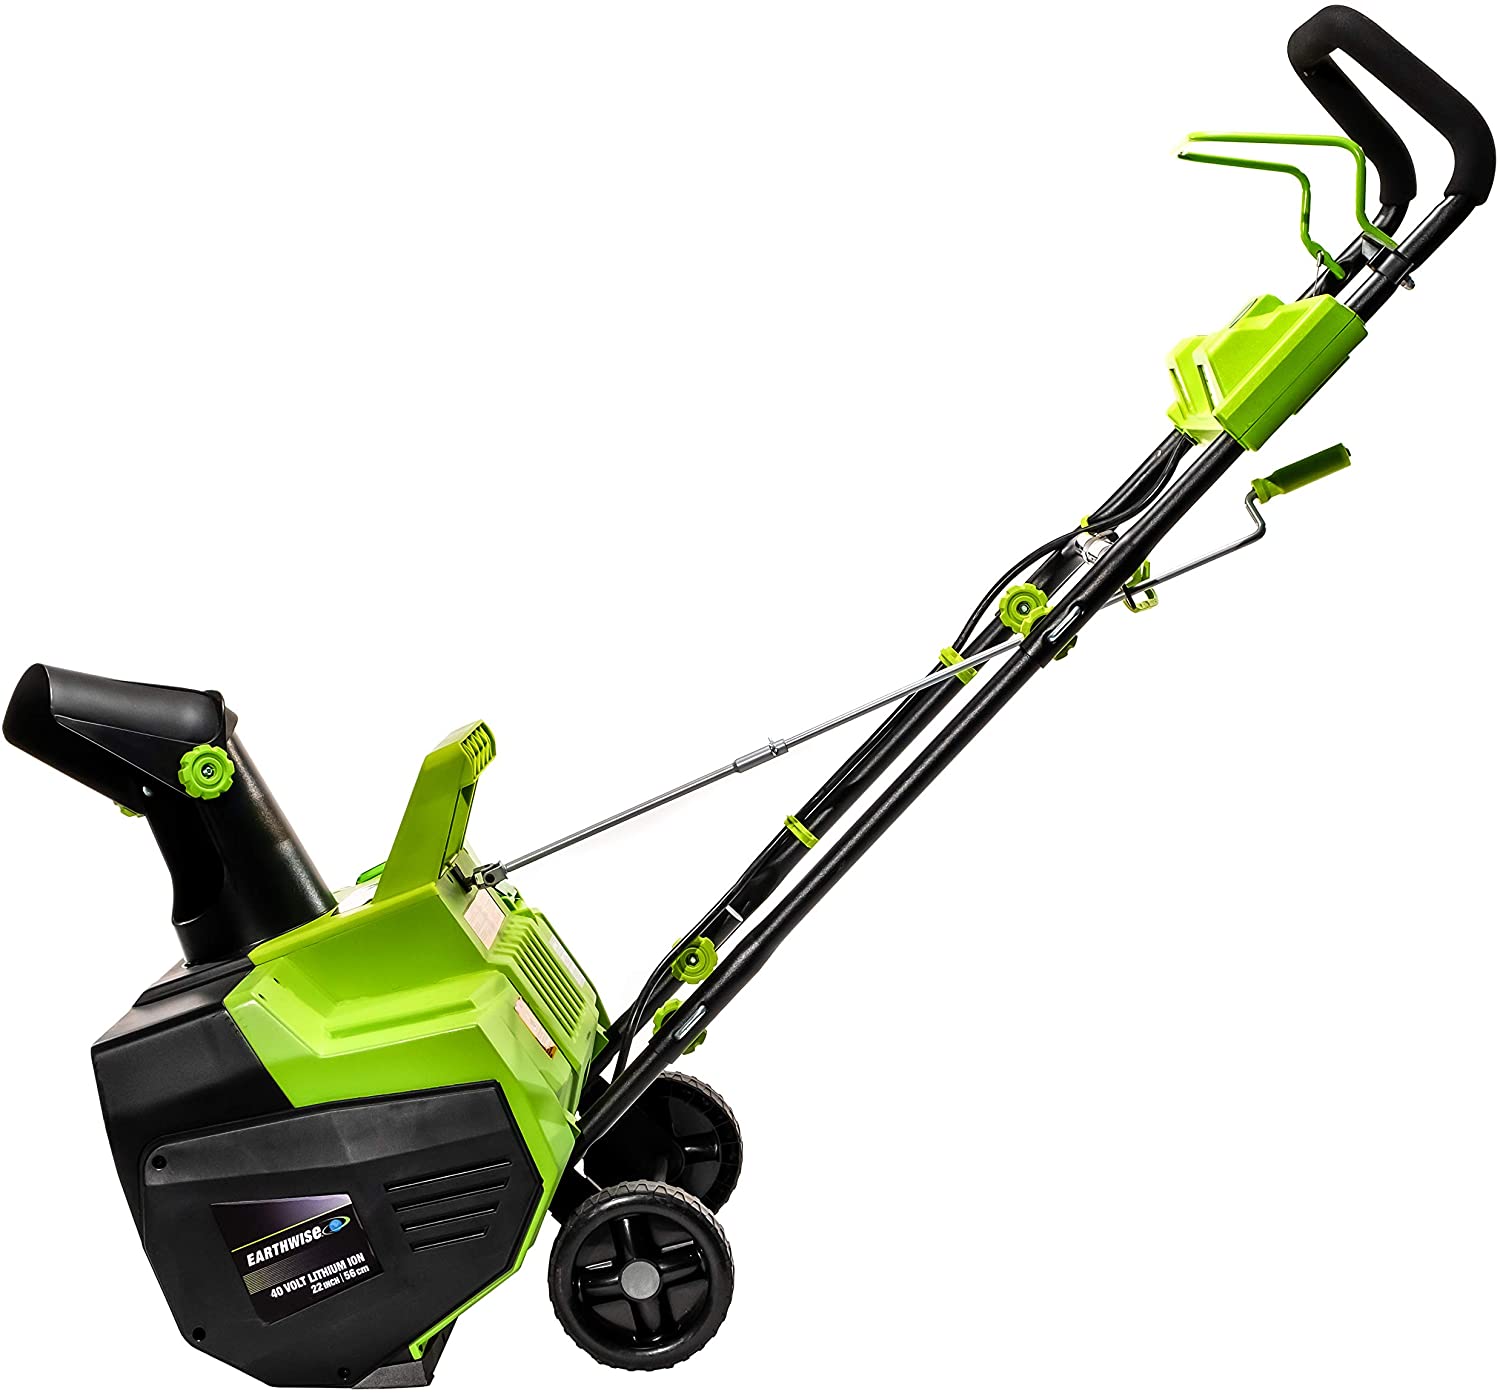 Earthwise Power Tools by ALM 22 40V 4Ah Lithium Snow Thrower – American  Lawn Mower Co. EST 1895